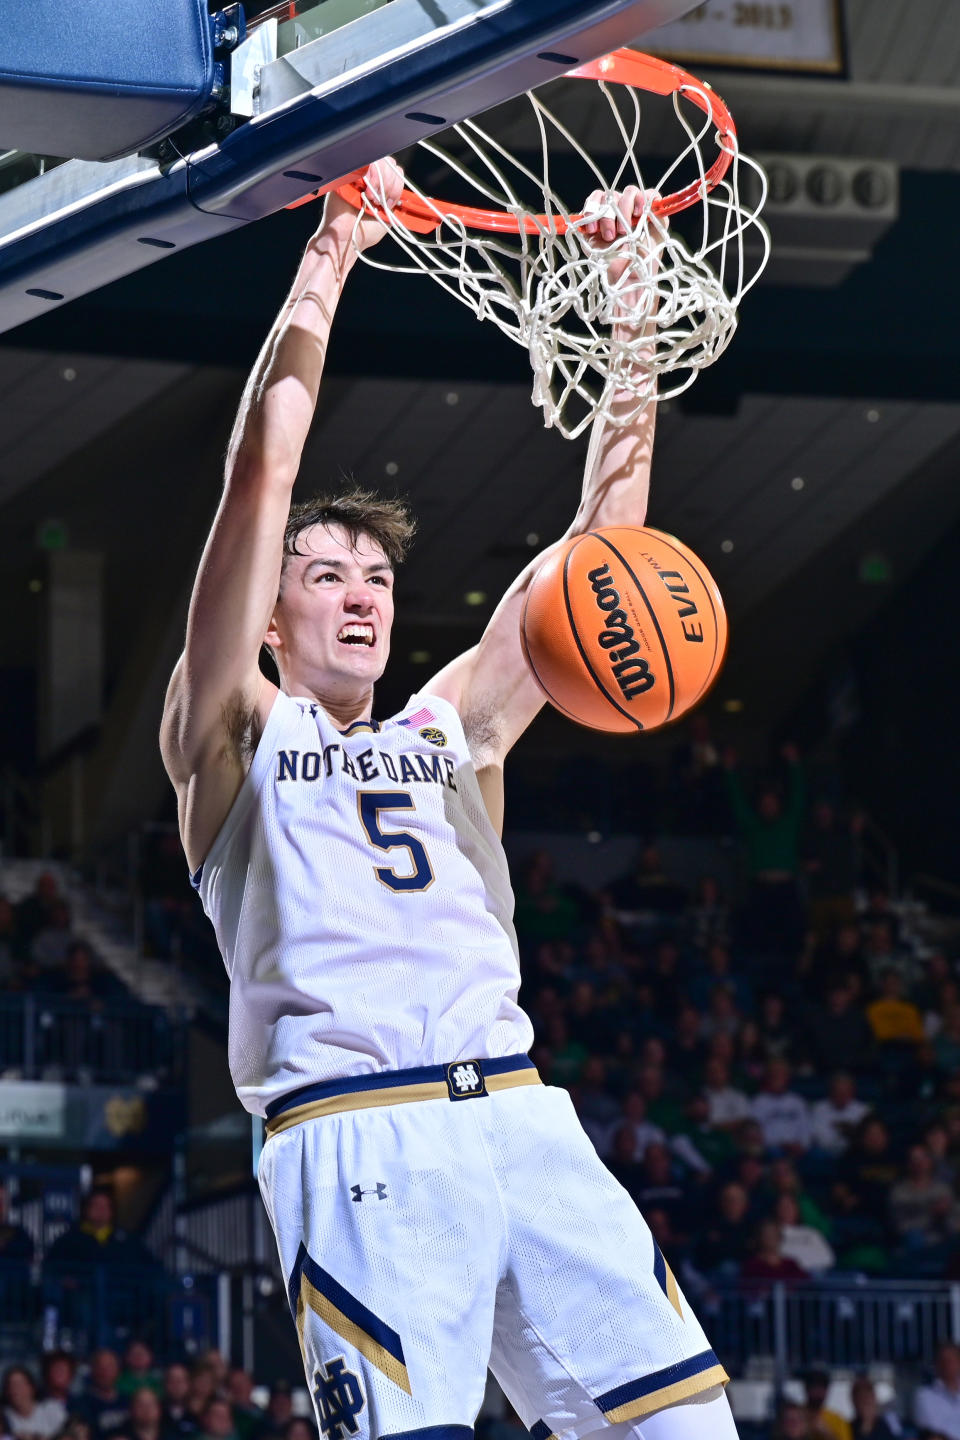 Mar 1, 2023; South Bend, Indiana, USA; Notre Dame Fighting Irish guard Cormac Ryan (5) dunks in the second half against the Pittsburgh Panthers at the Purcell Pavilion. Mandatory Credit: Matt Cashore-USA TODAY Sports